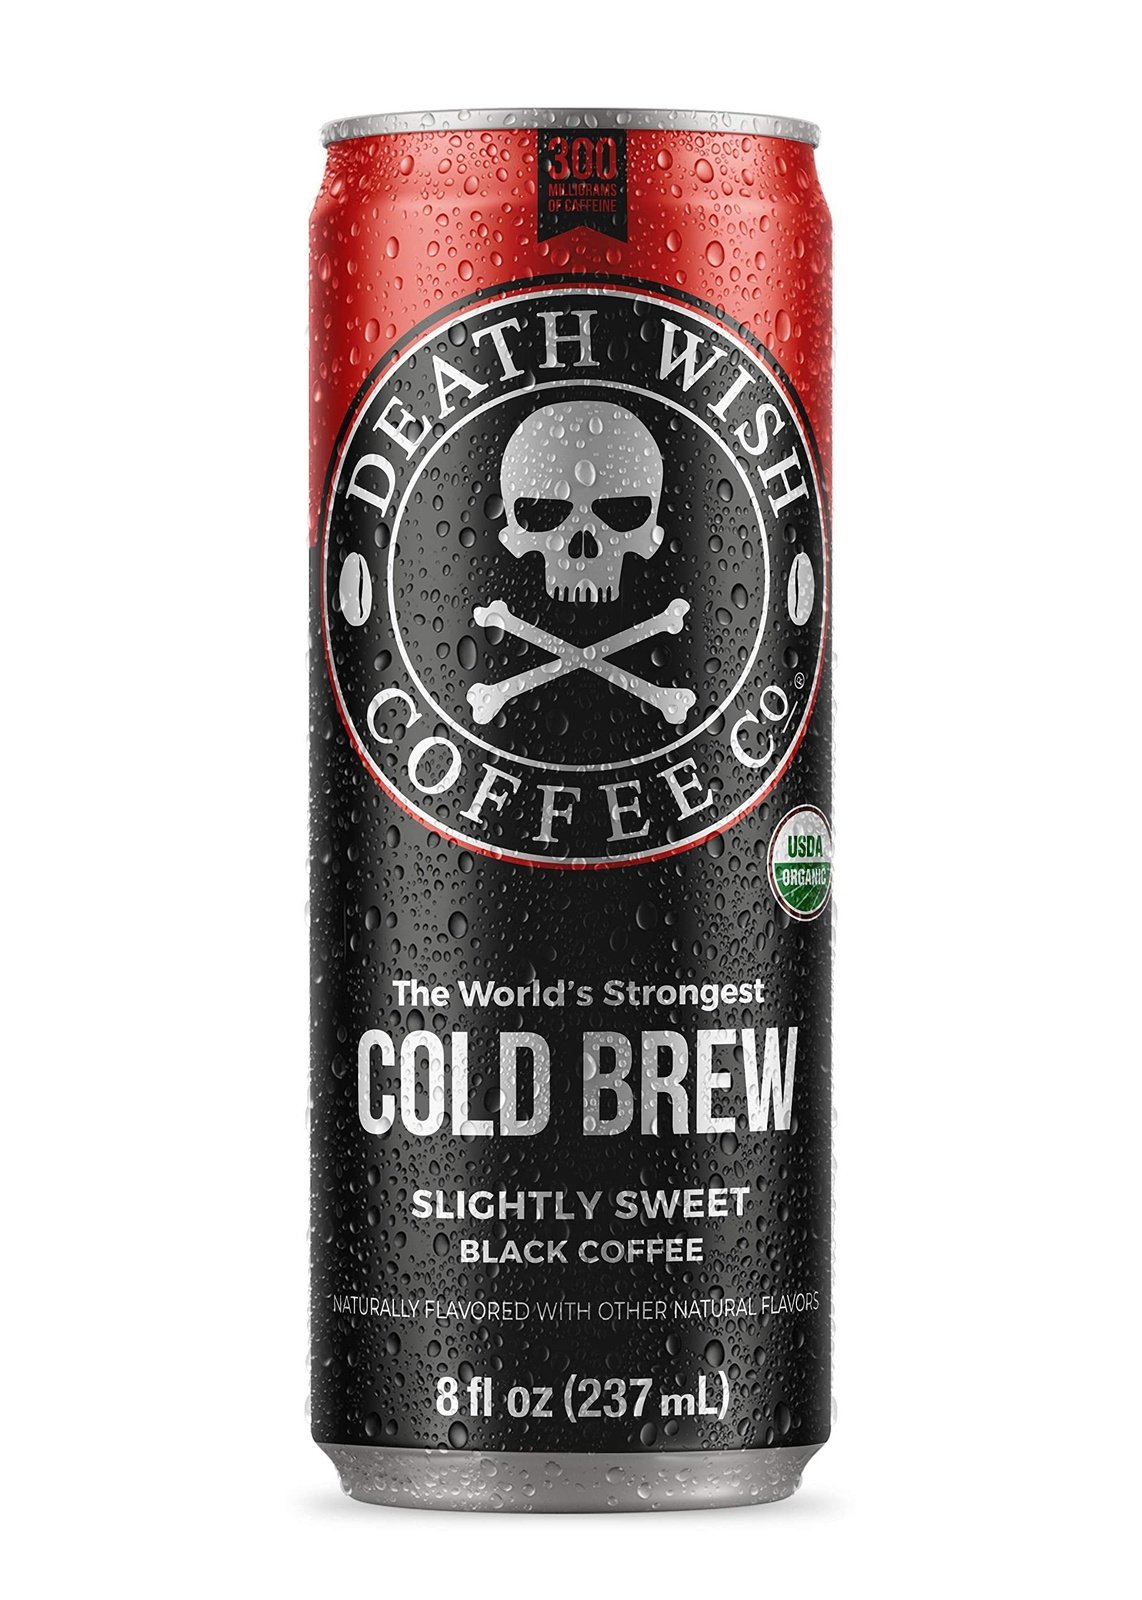 DEATH WISH COFFEE The World's Strongest Cold Brew